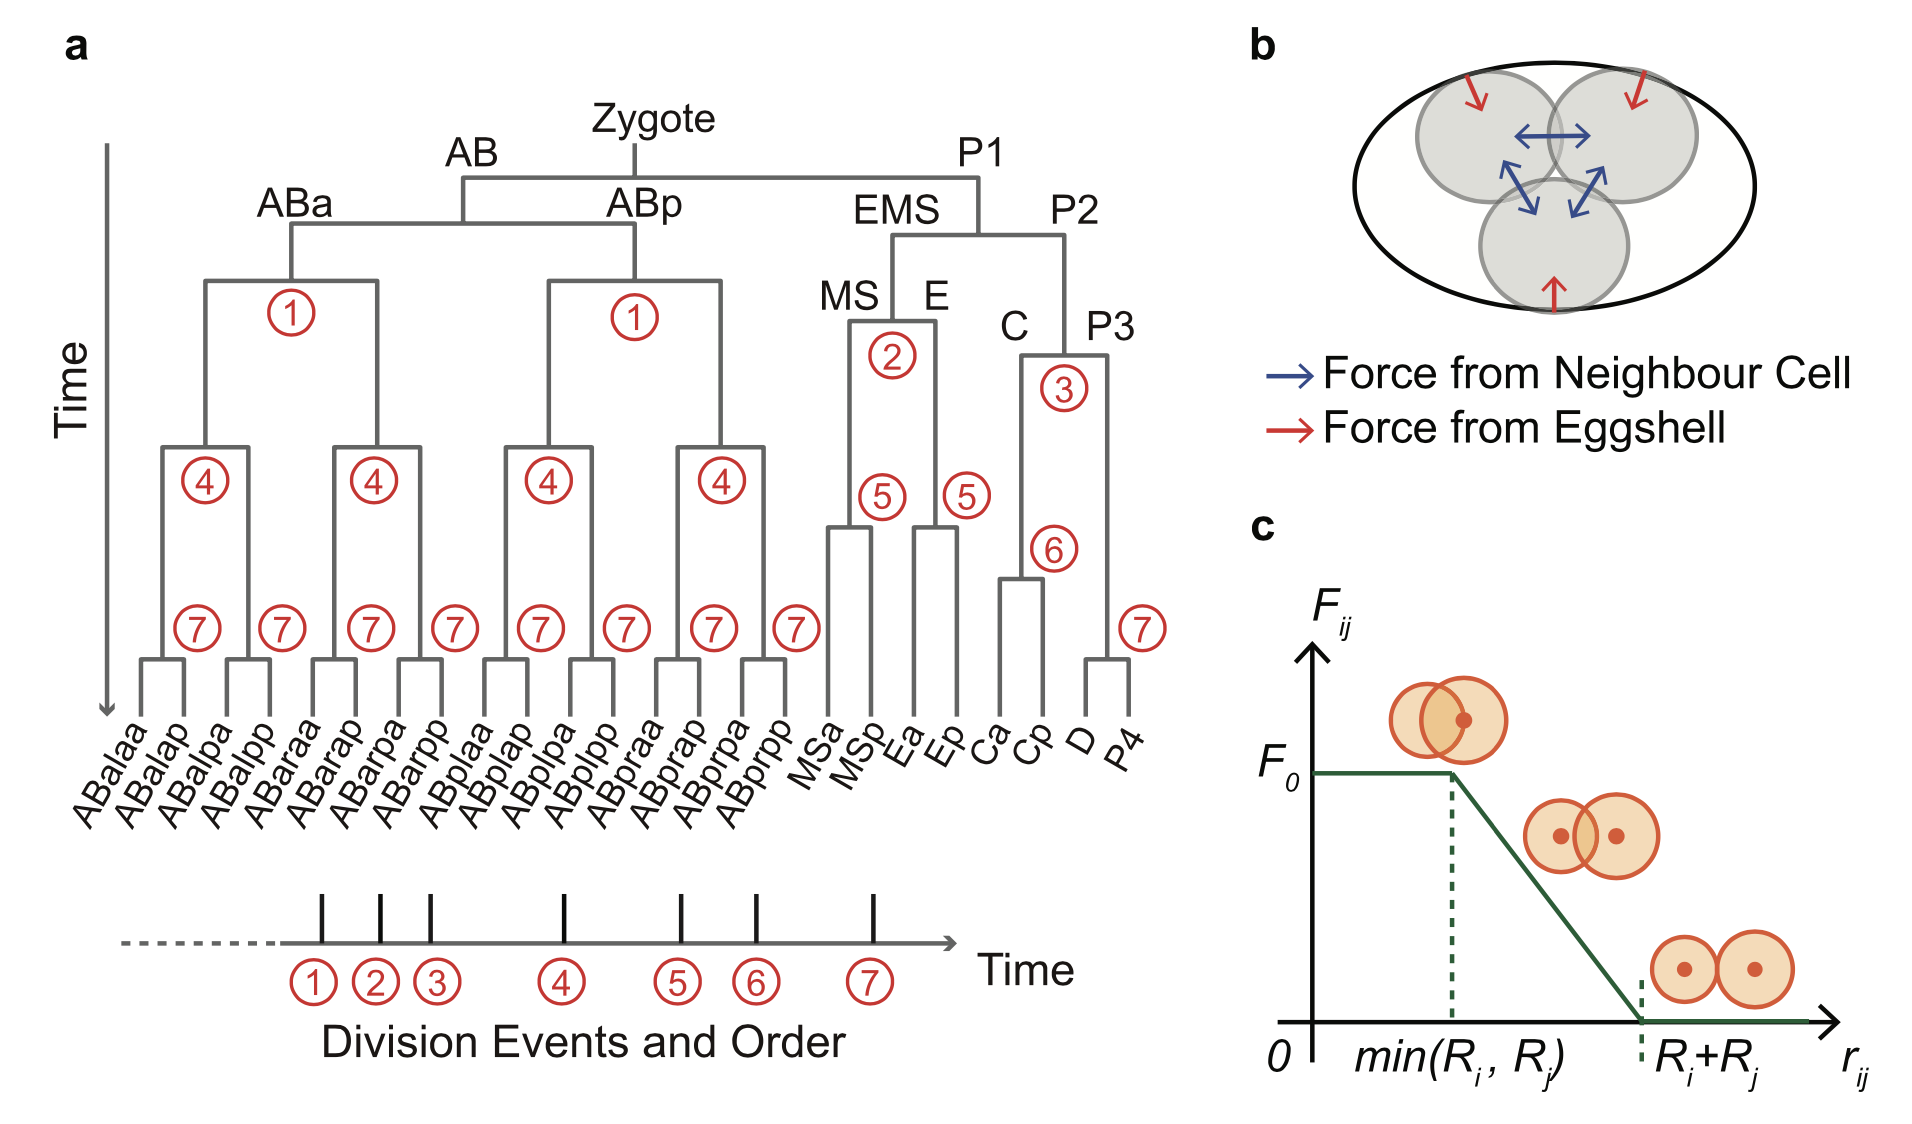 Tang lab published paper on Physical Biology studying the robustness of the direction and sequence of division in the development of C. elegans embryos